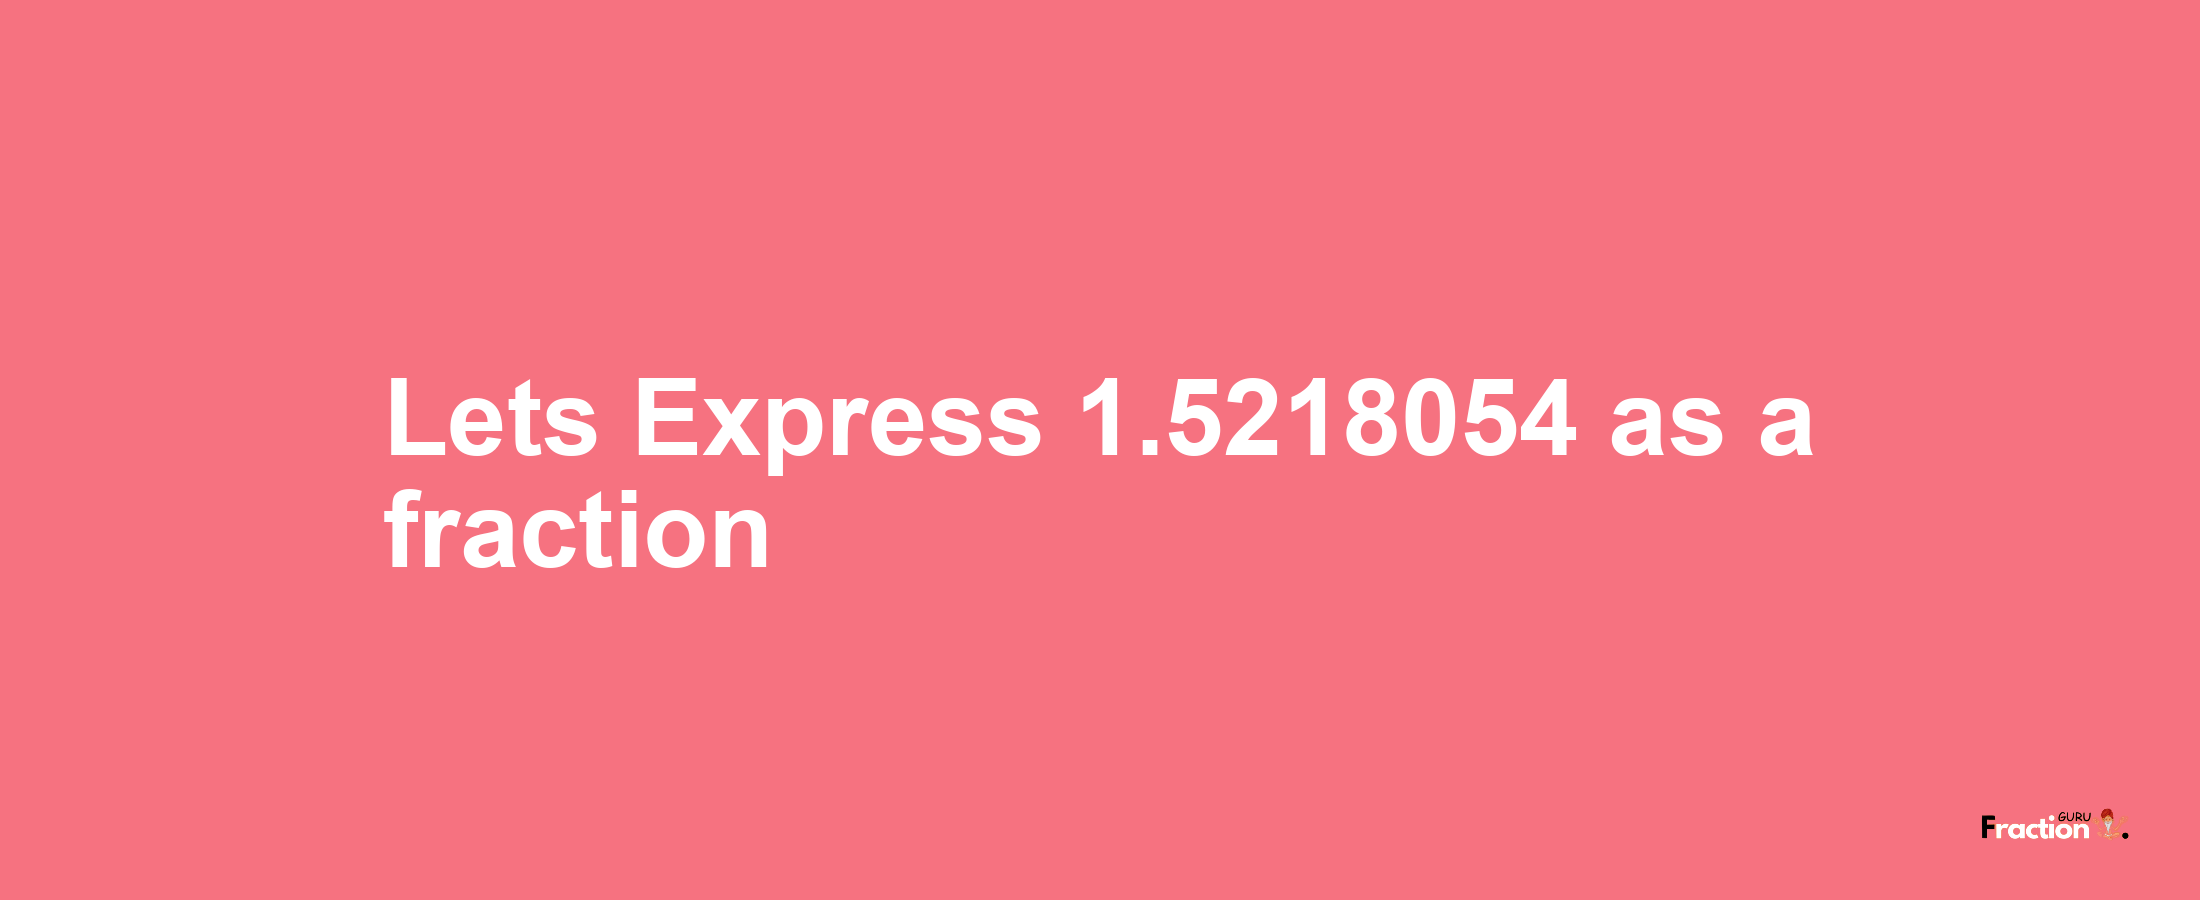 Lets Express 1.5218054 as afraction